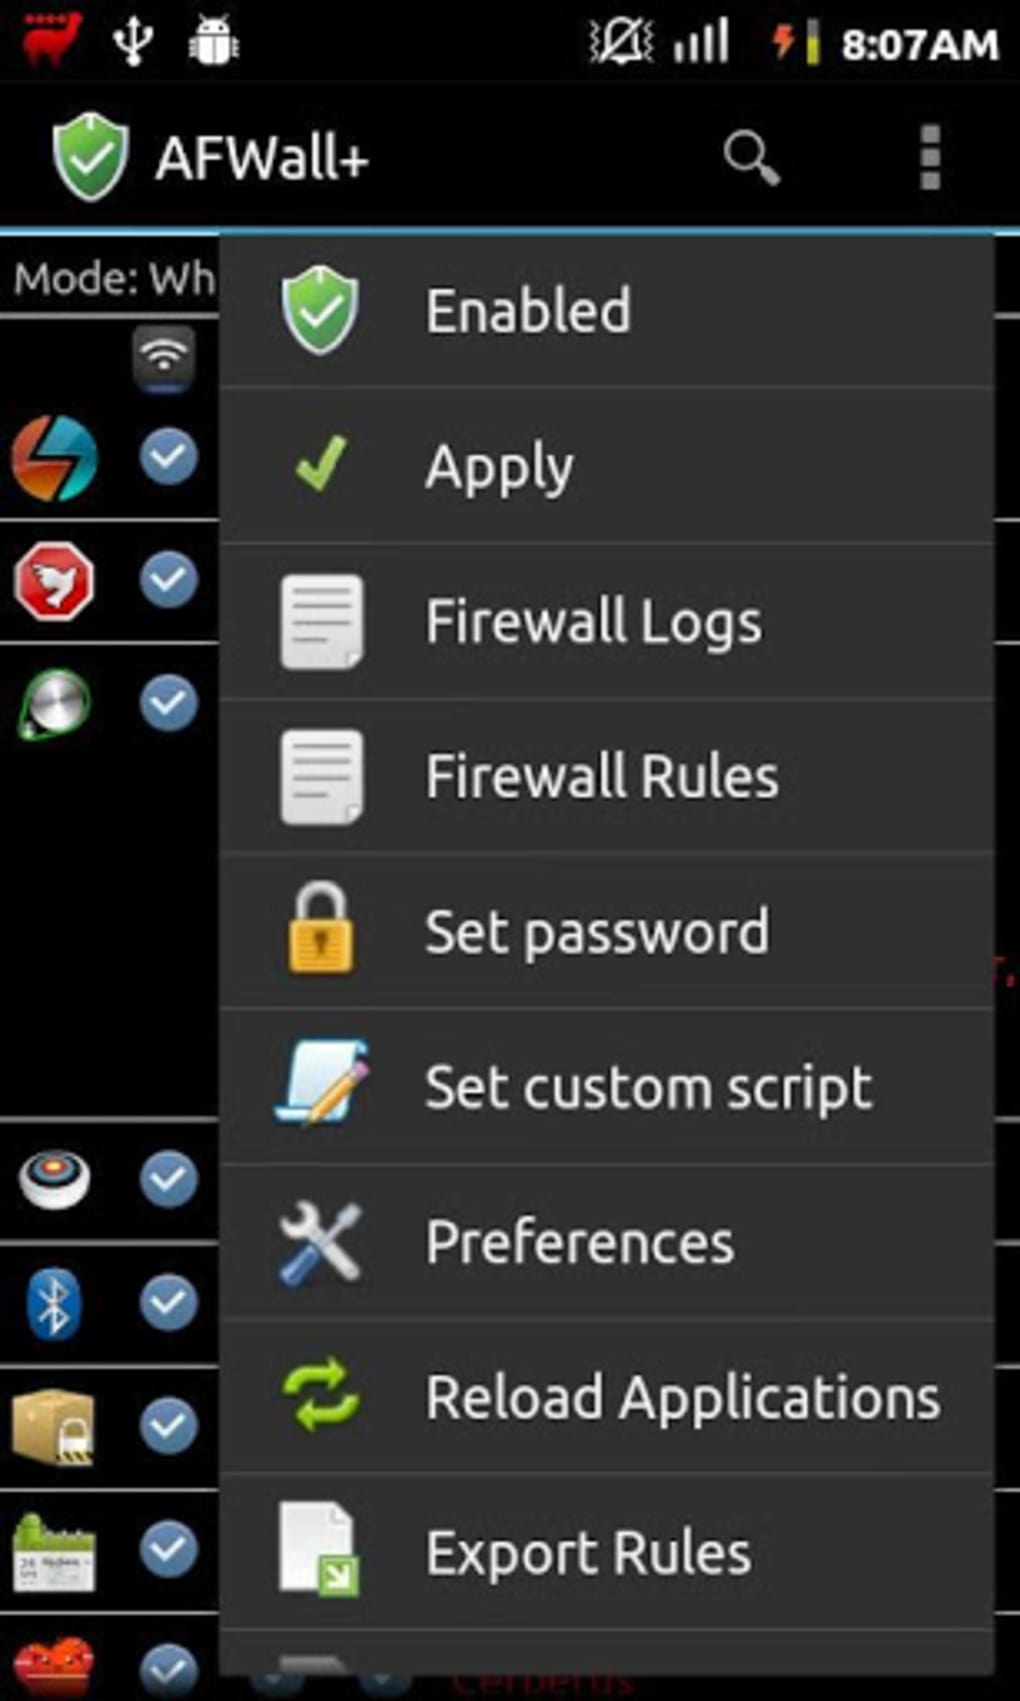 Windows Firewall Control download the new for android